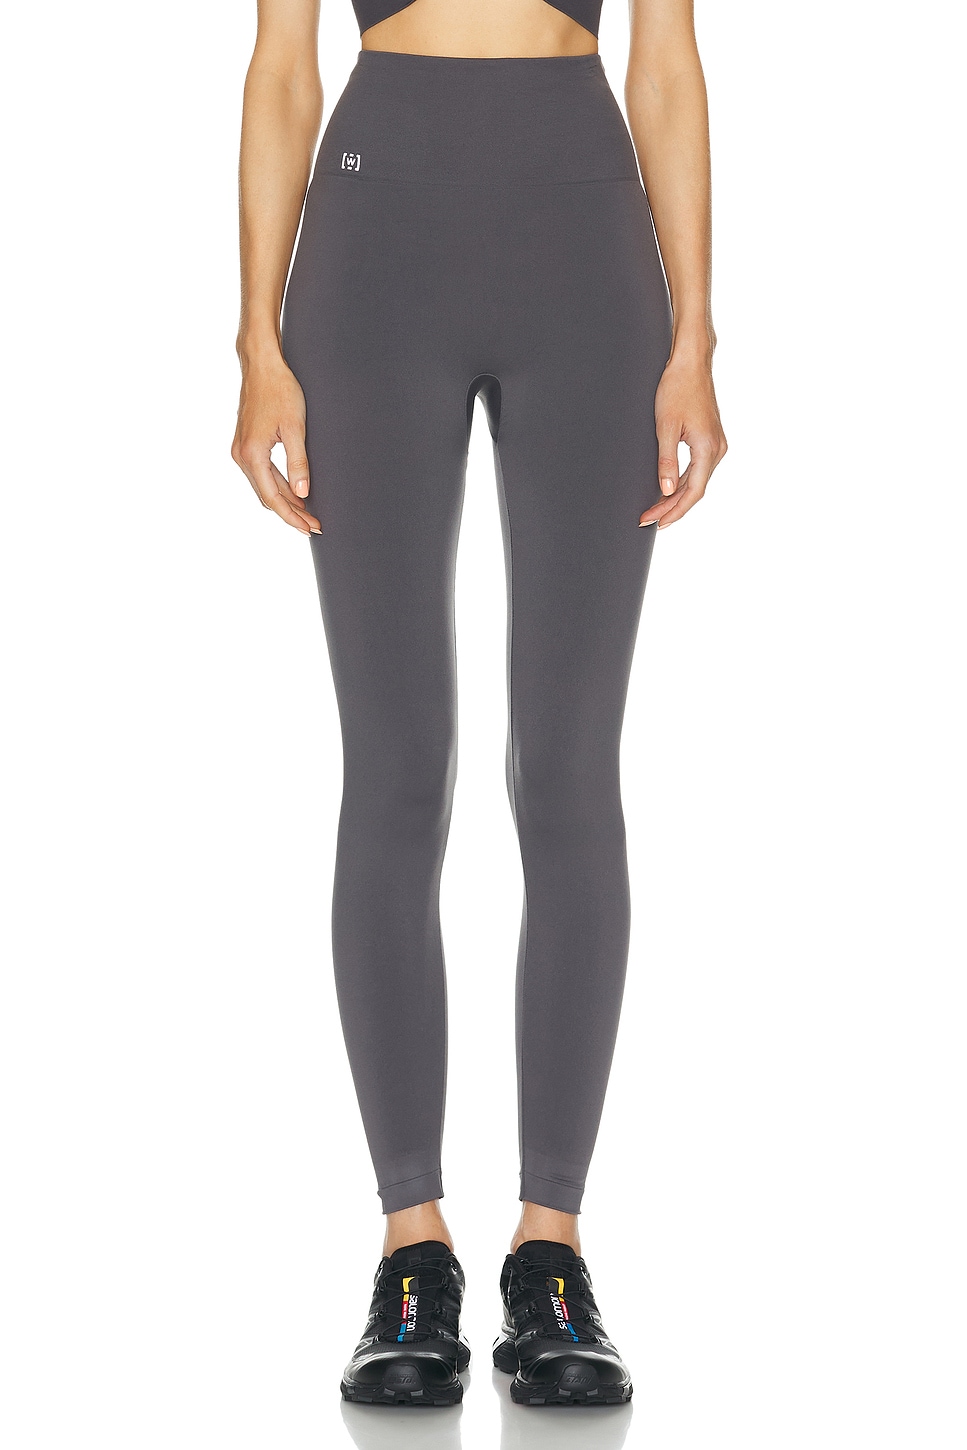 Image 1 of Wolford Body Shaping Legging in Titanium